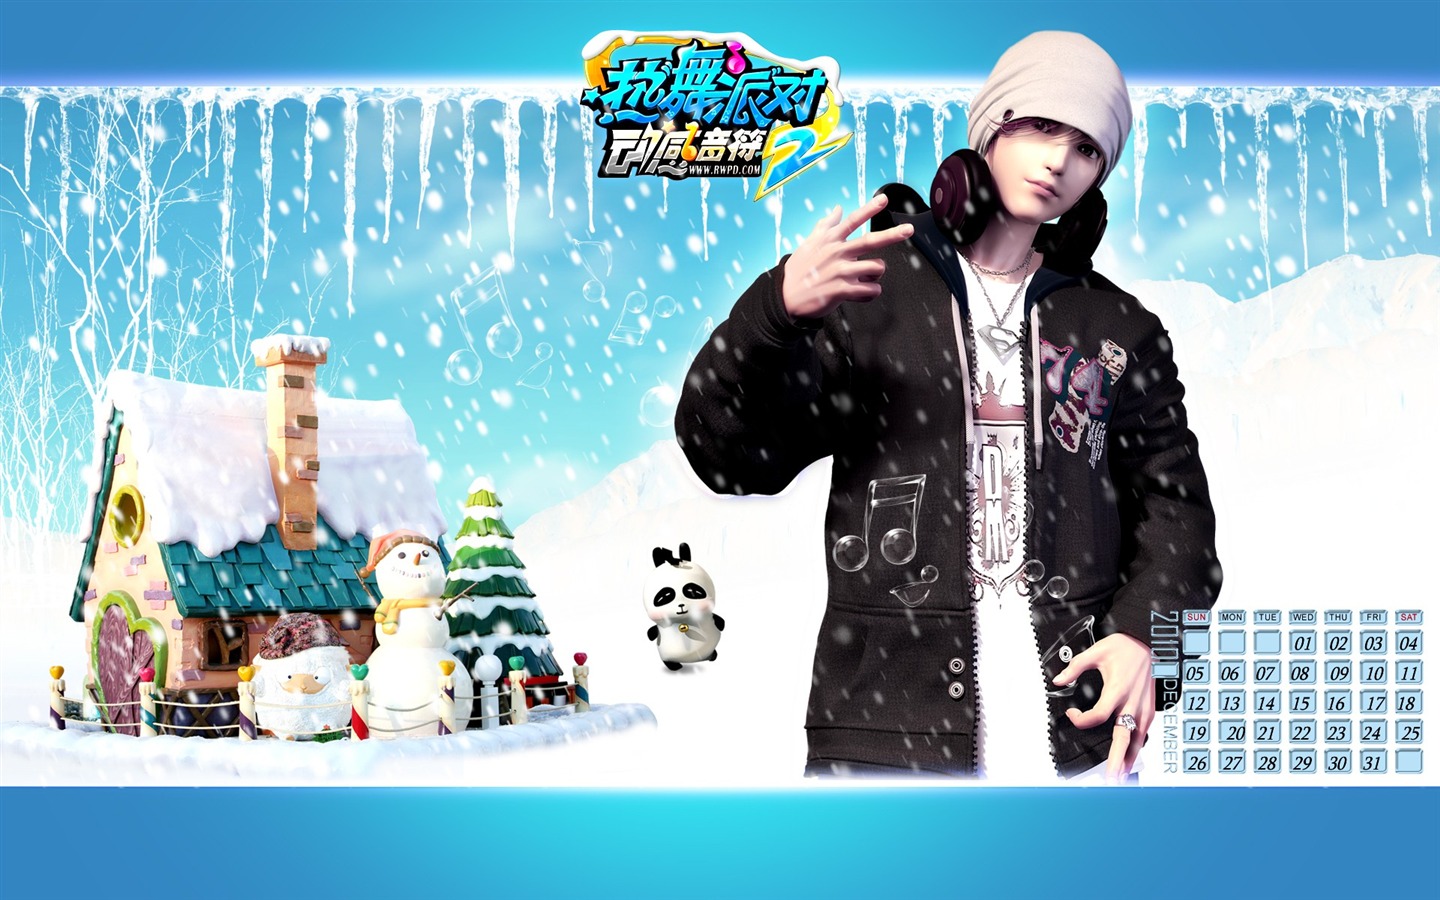 Online game Hot Dance Party II official wallpapers #36 - 1440x900